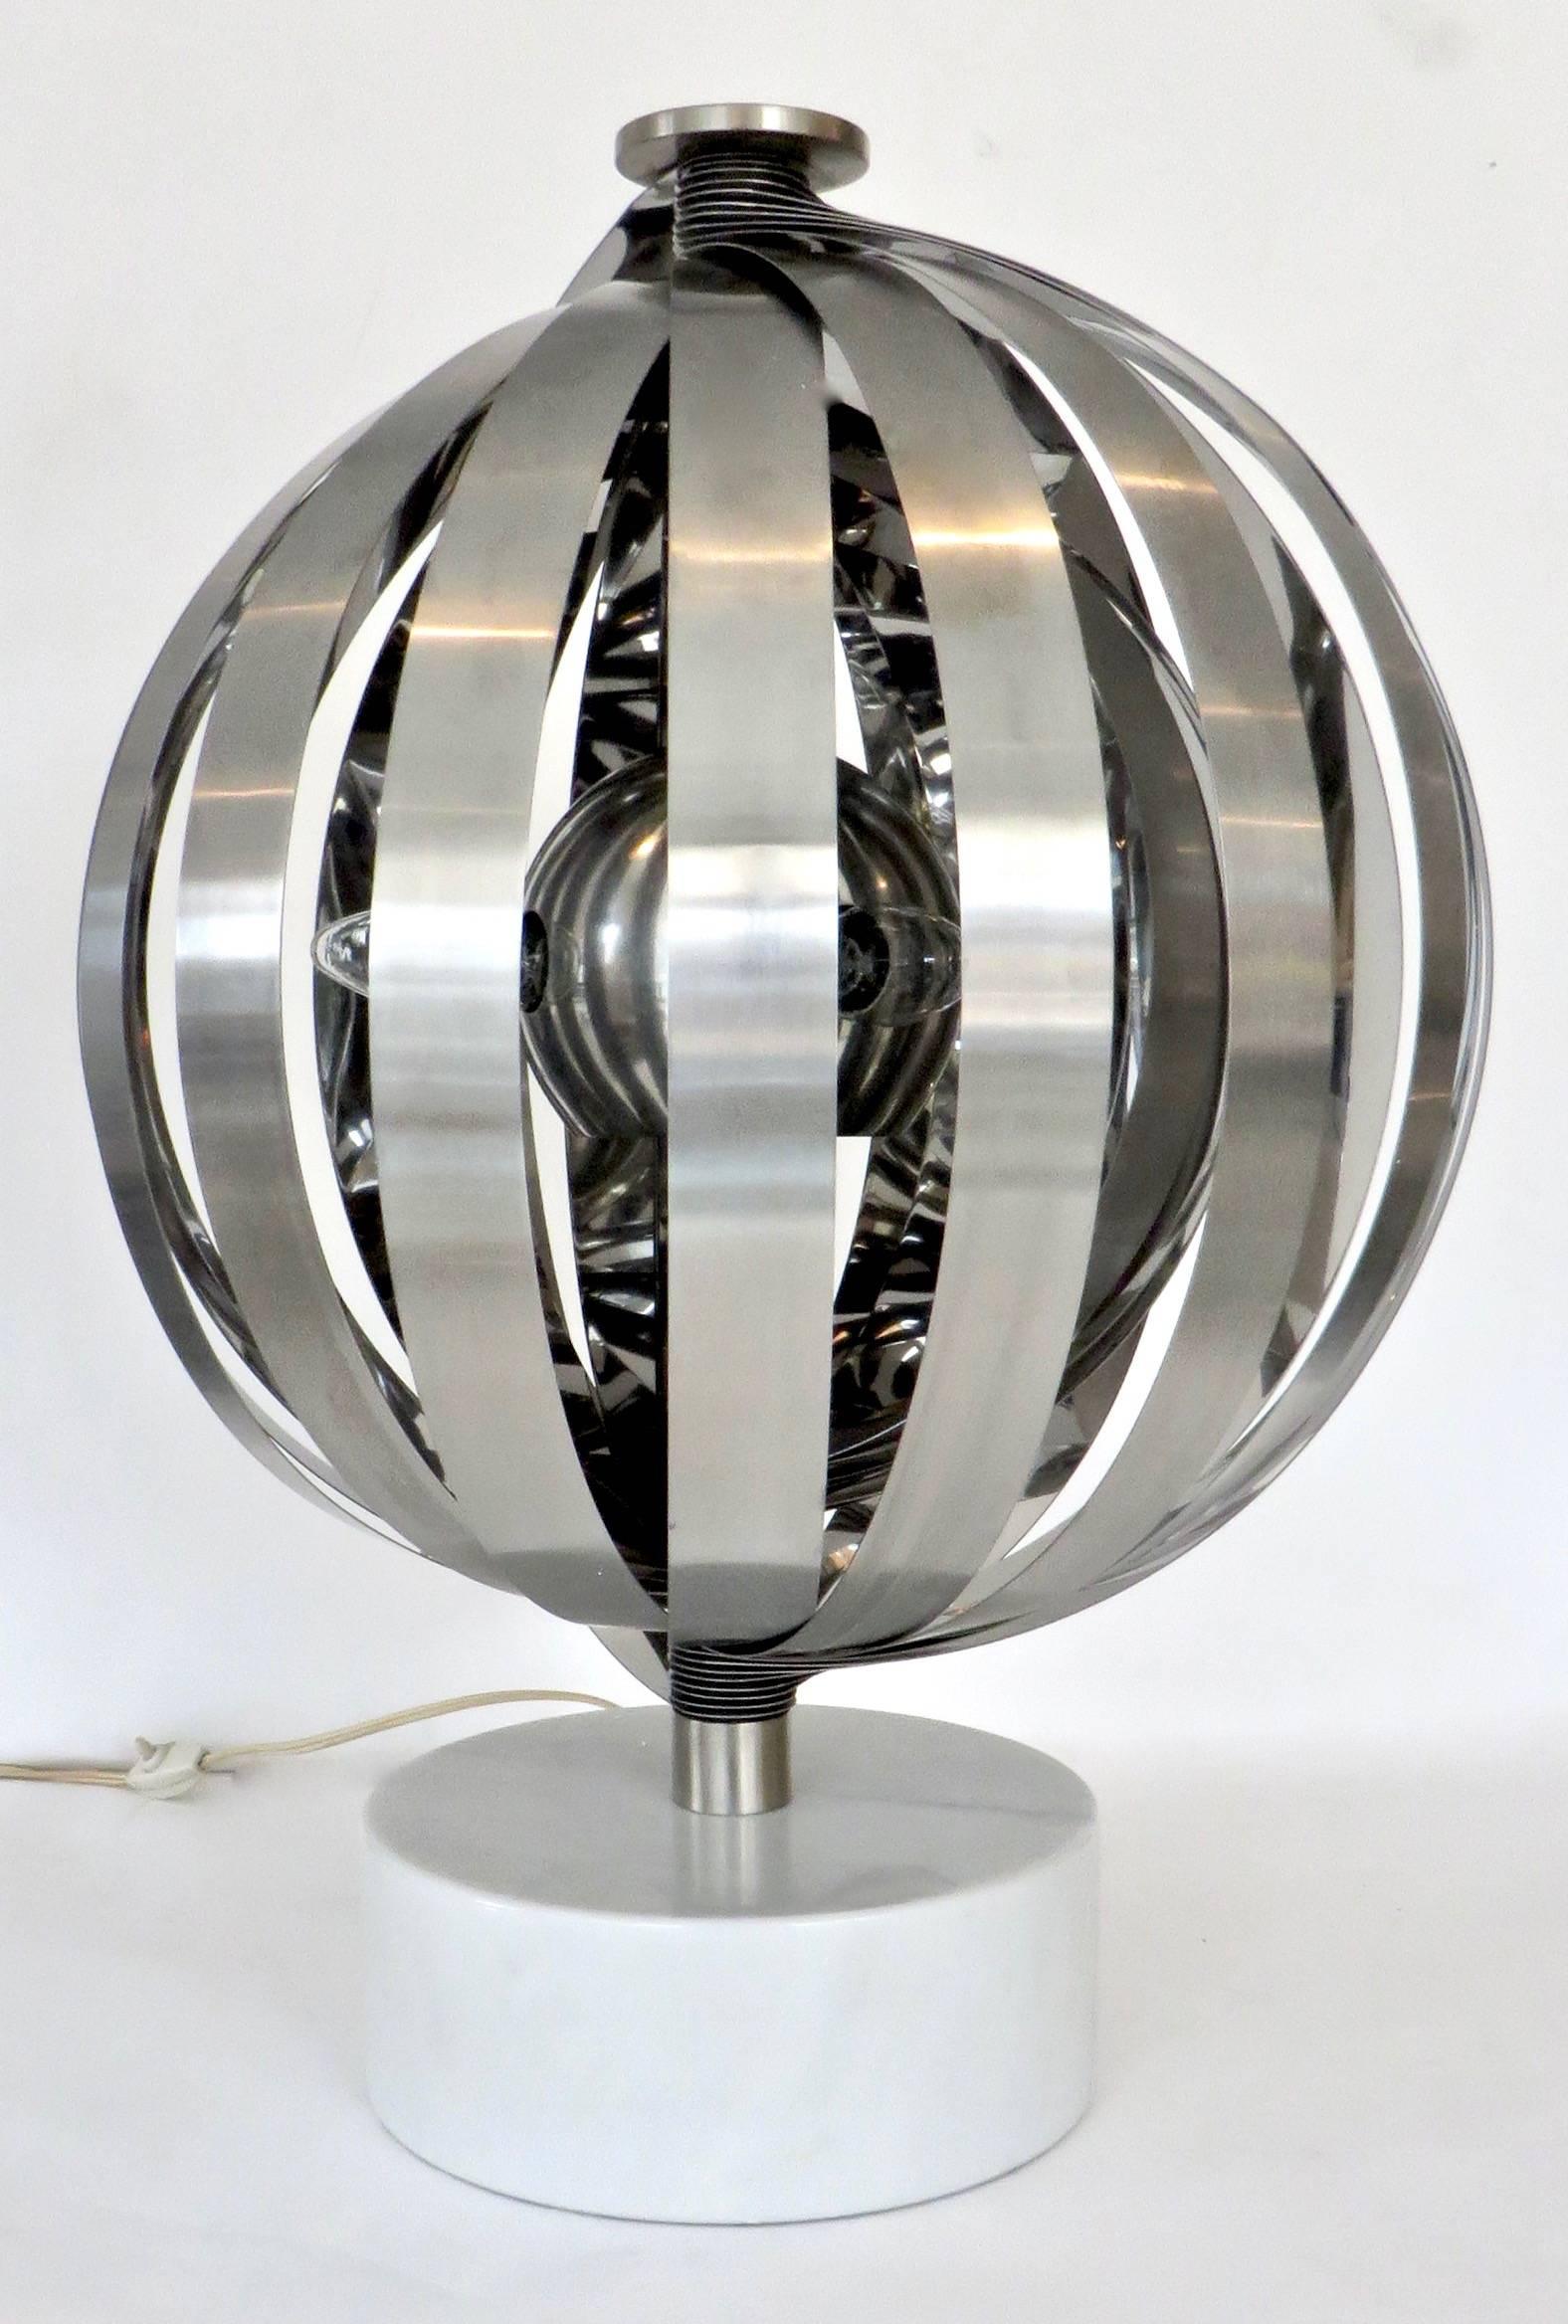 Stainless steel and marble table lamp by Gaetano Missaglia, Italy, circa 1970.
High polished interior with a matte finish exterior on the steel straps, that comprise the 